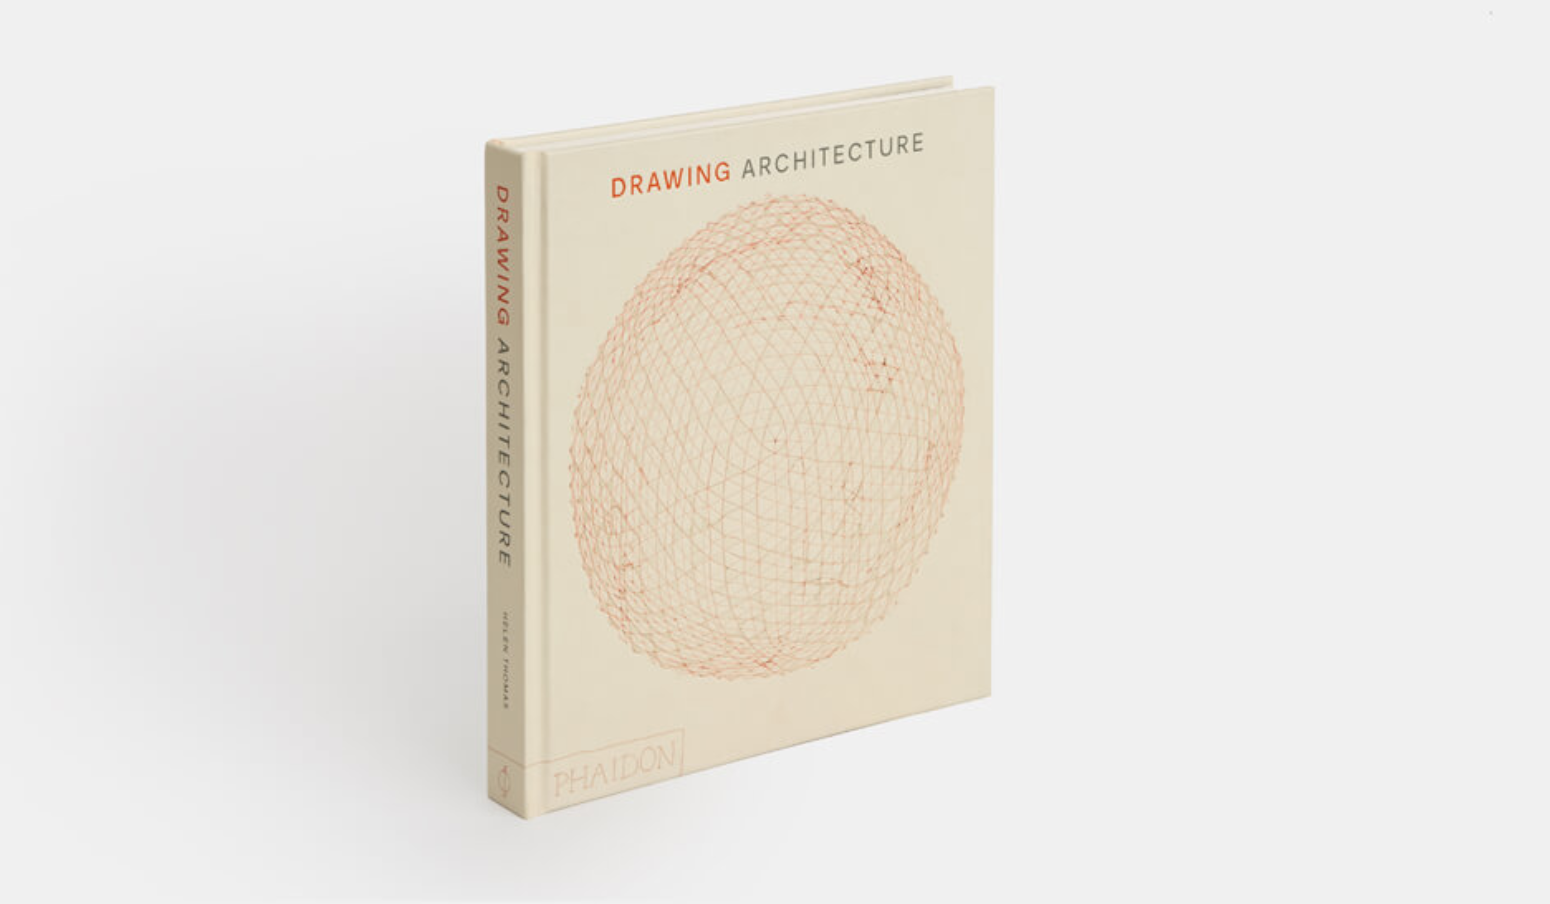 Phaidon's Drawing Architecture is available on Artspace for $79